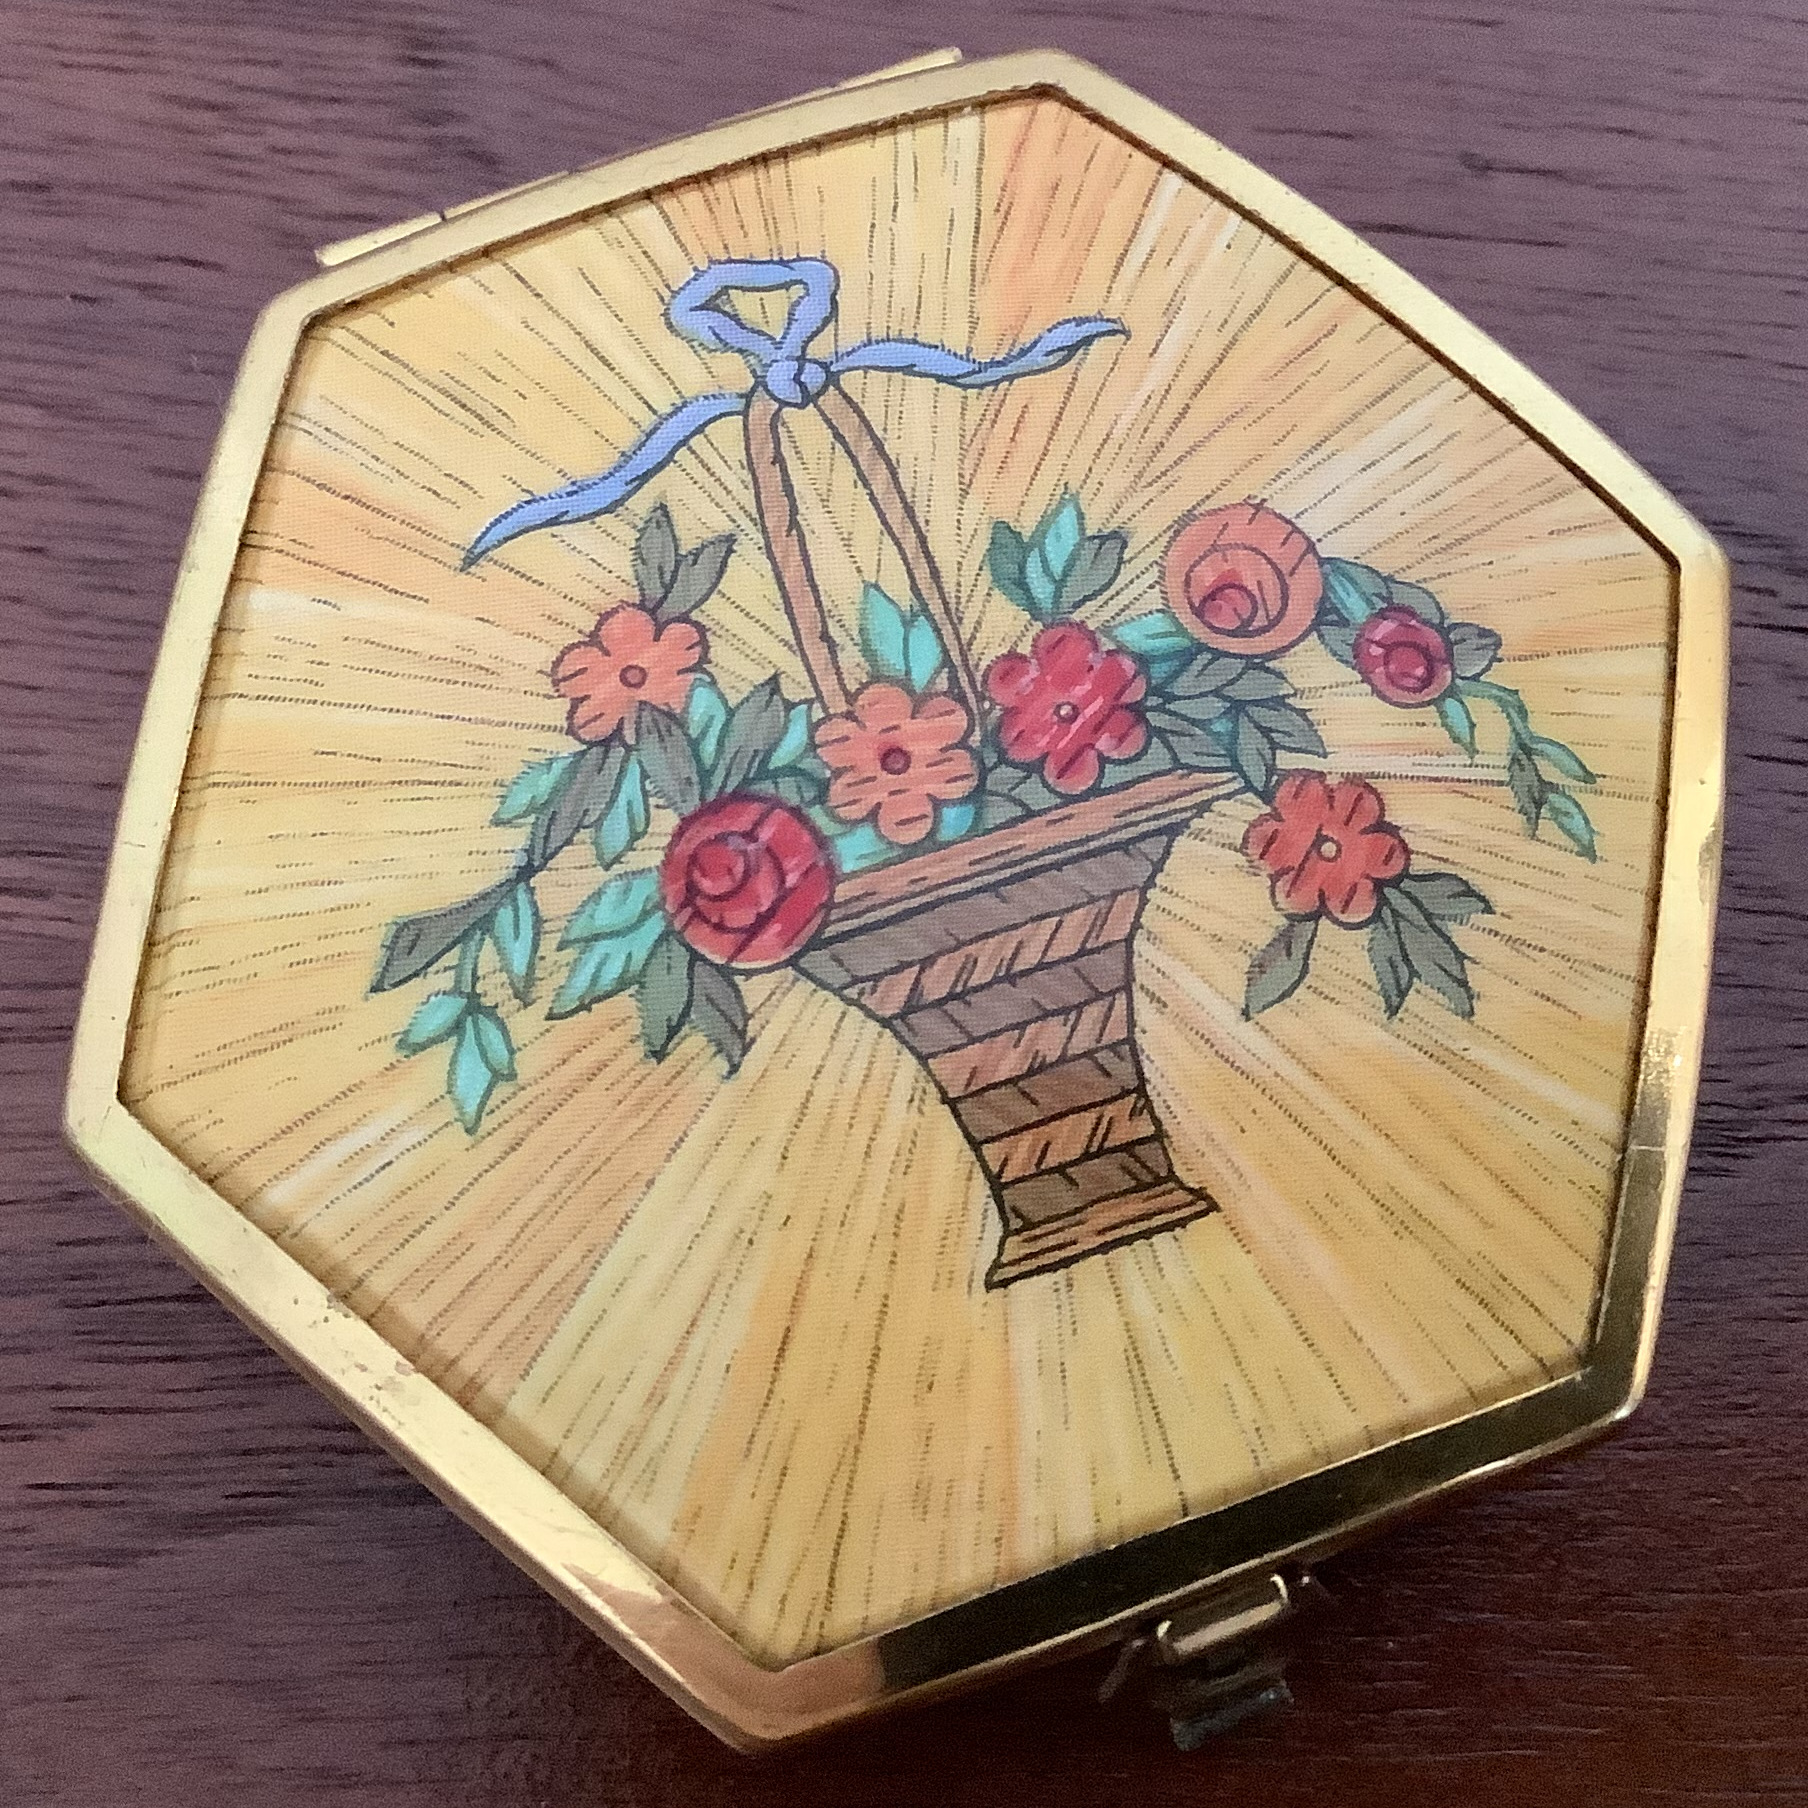 Compact cover depicting a tall, narrow basket full of flowers